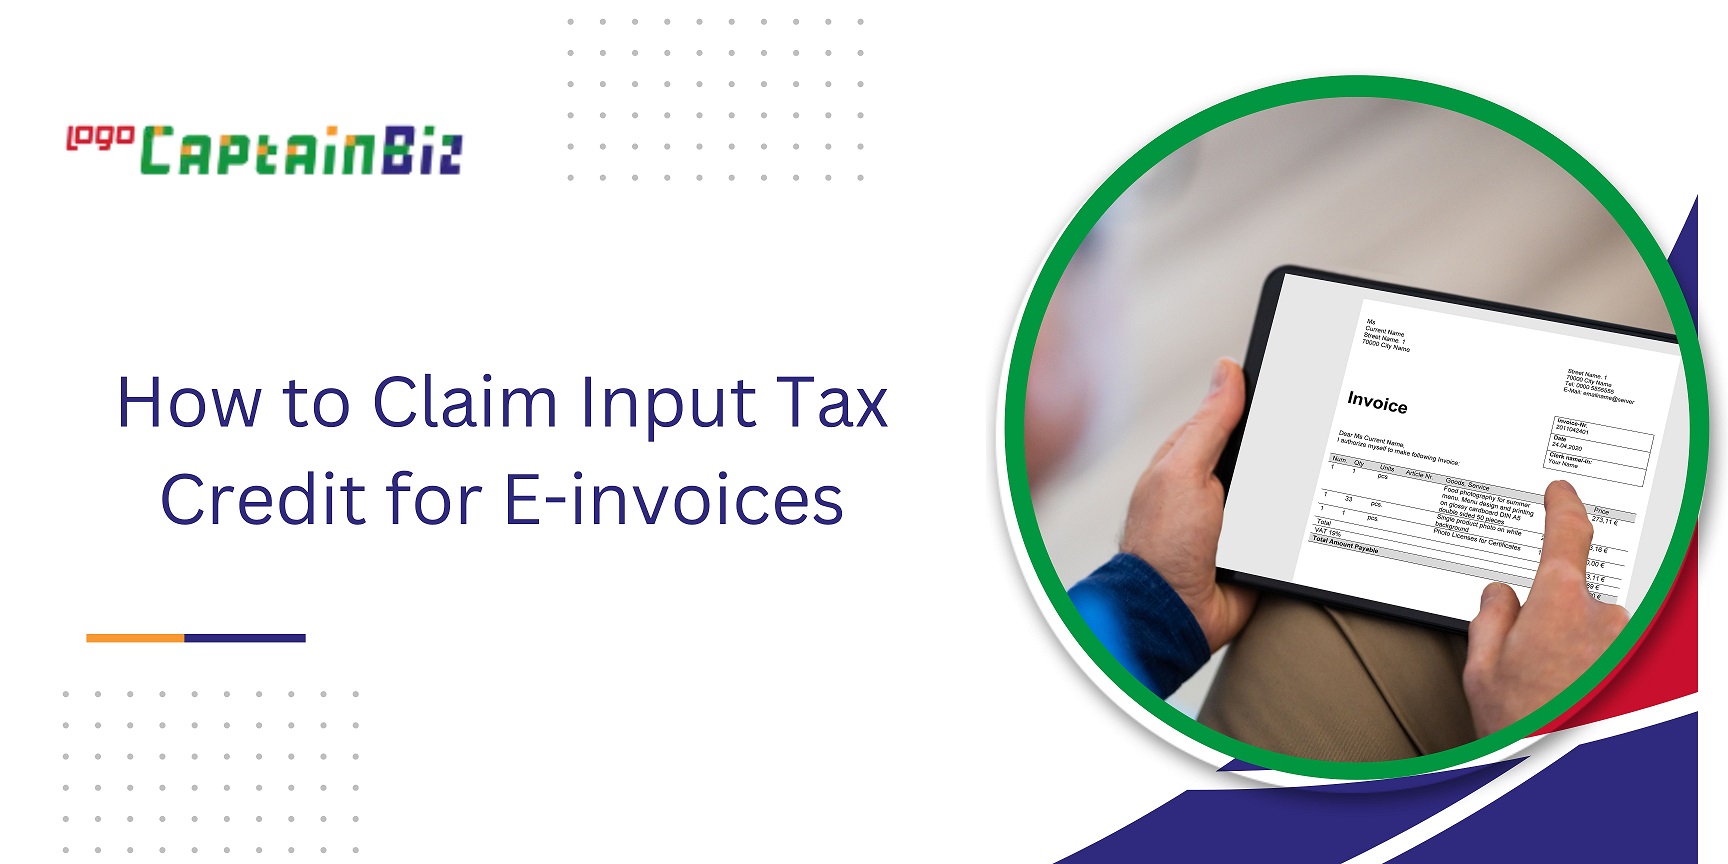 CaptainBiz: How to Claim Input Tax Credit for E-invoices